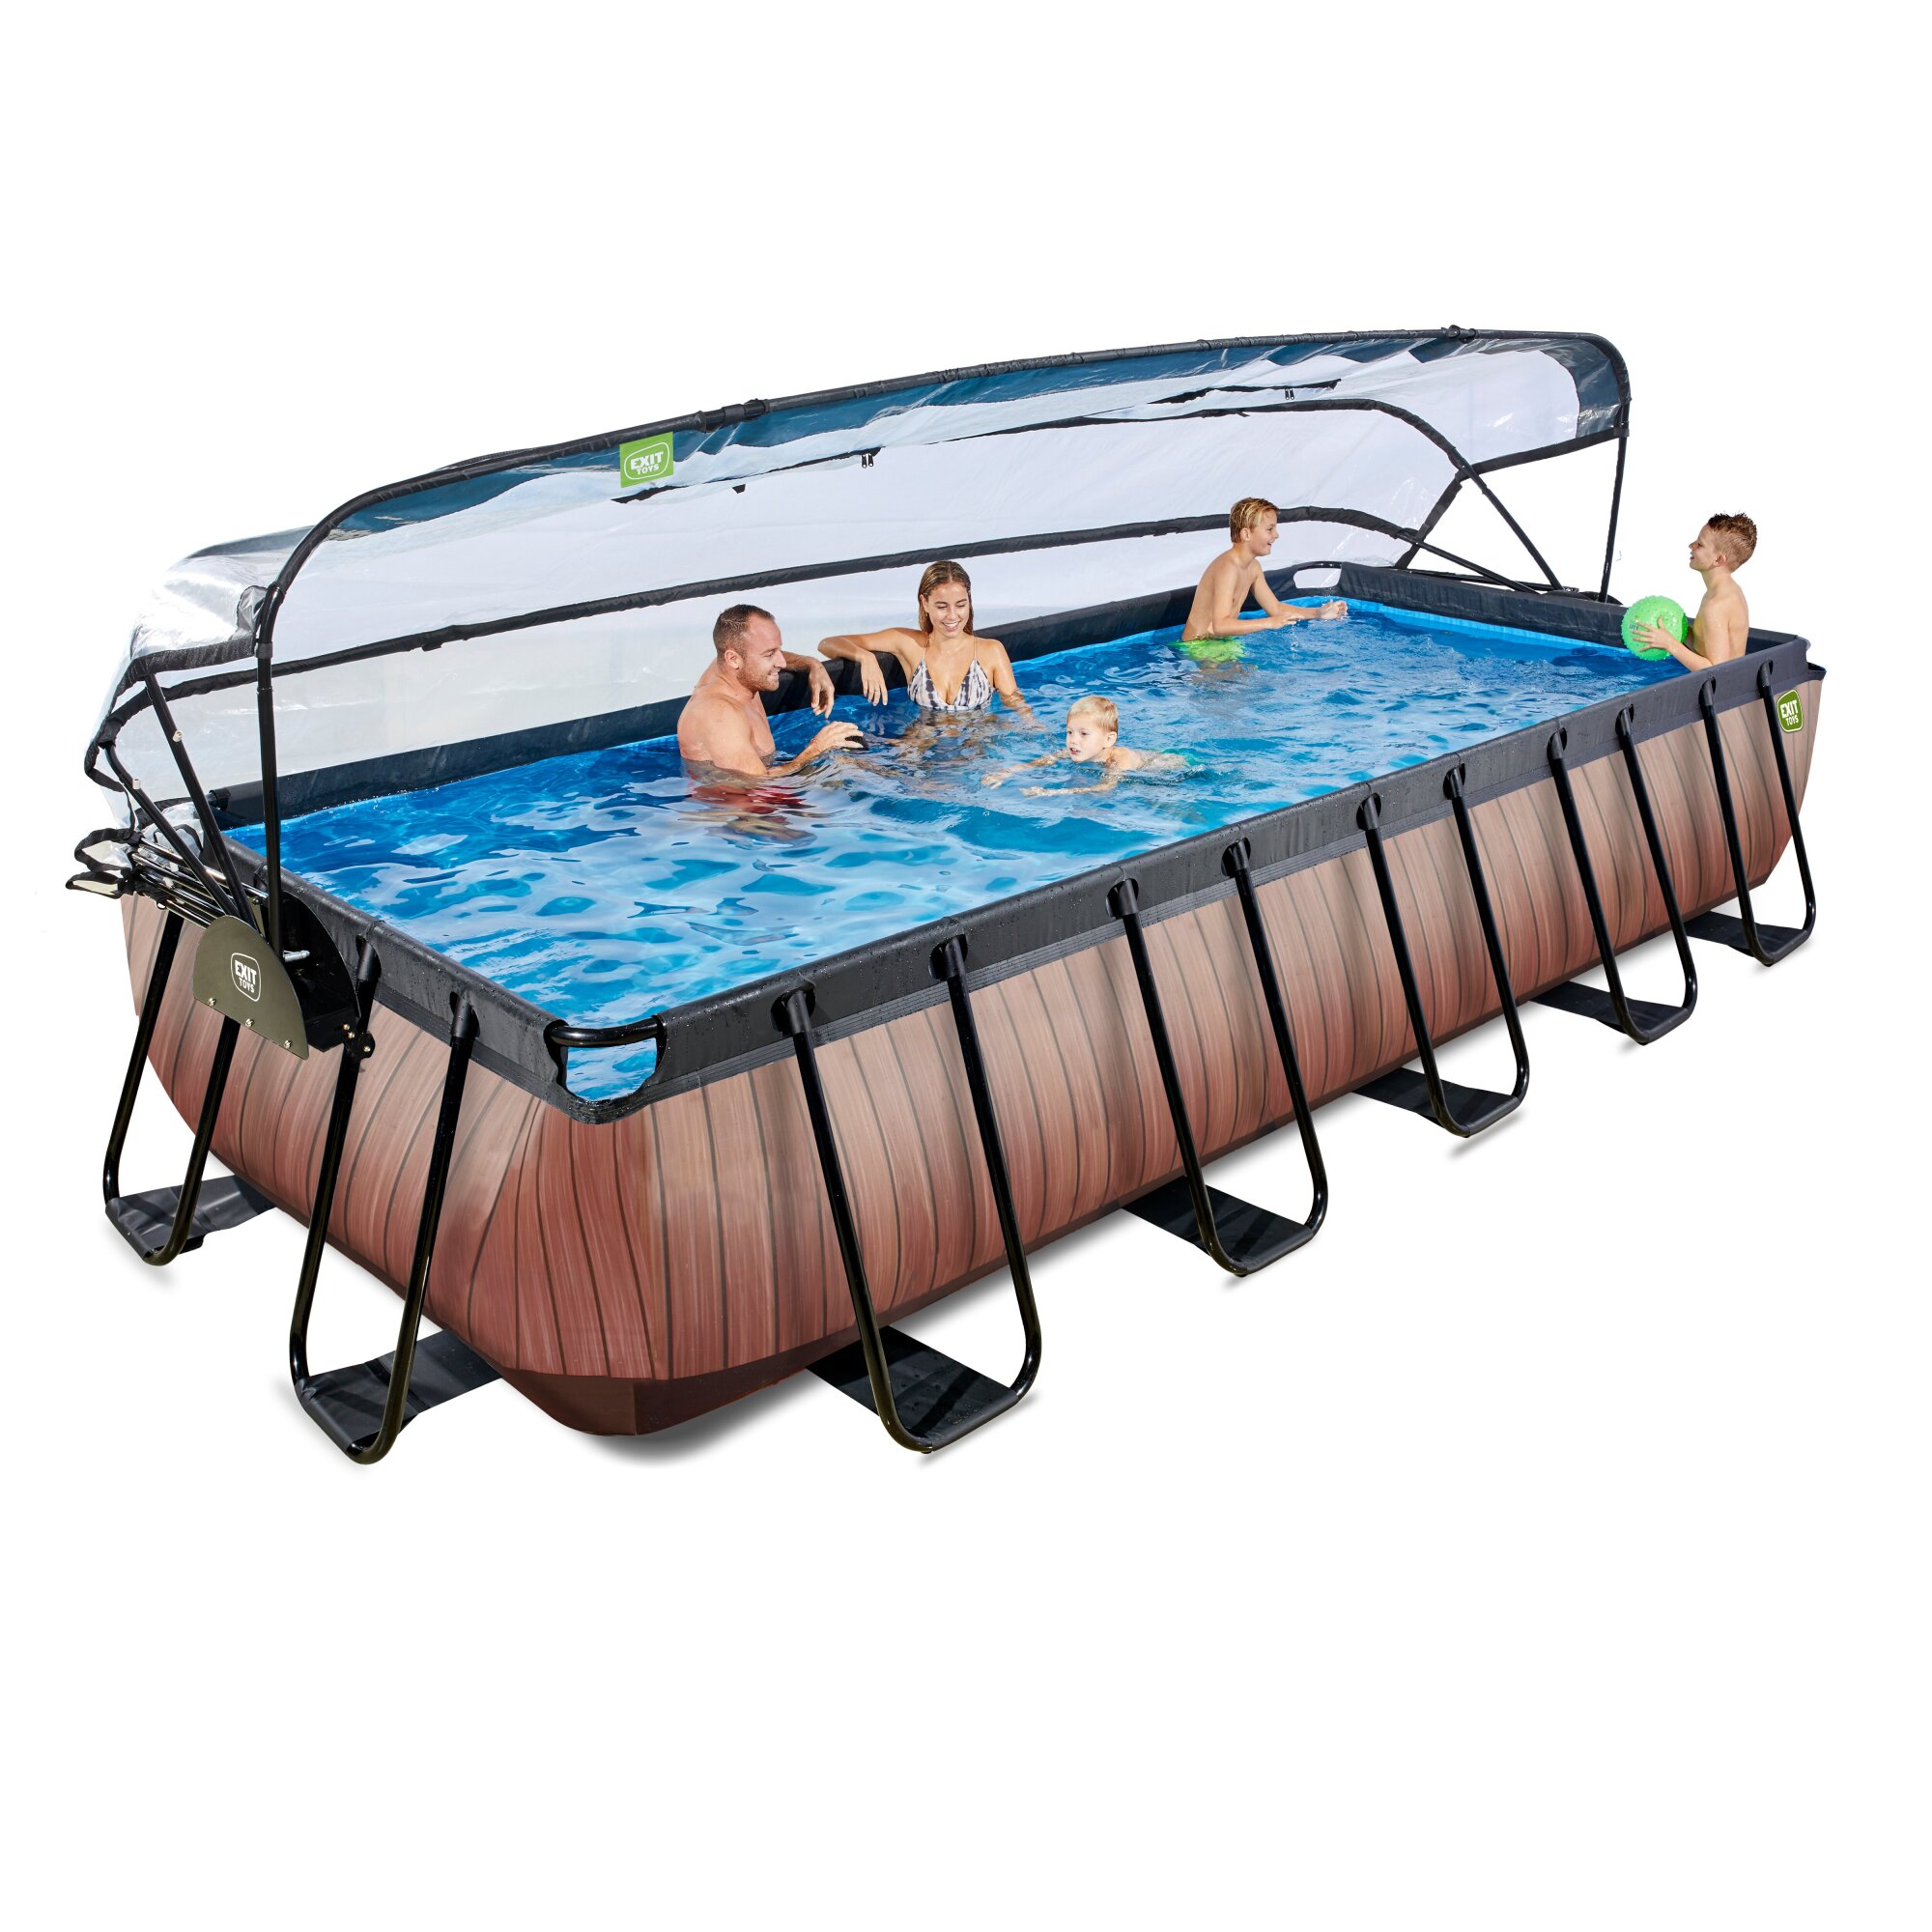 EXIT Wood pool 540x250x100cm with sand filter pump and dome - brown